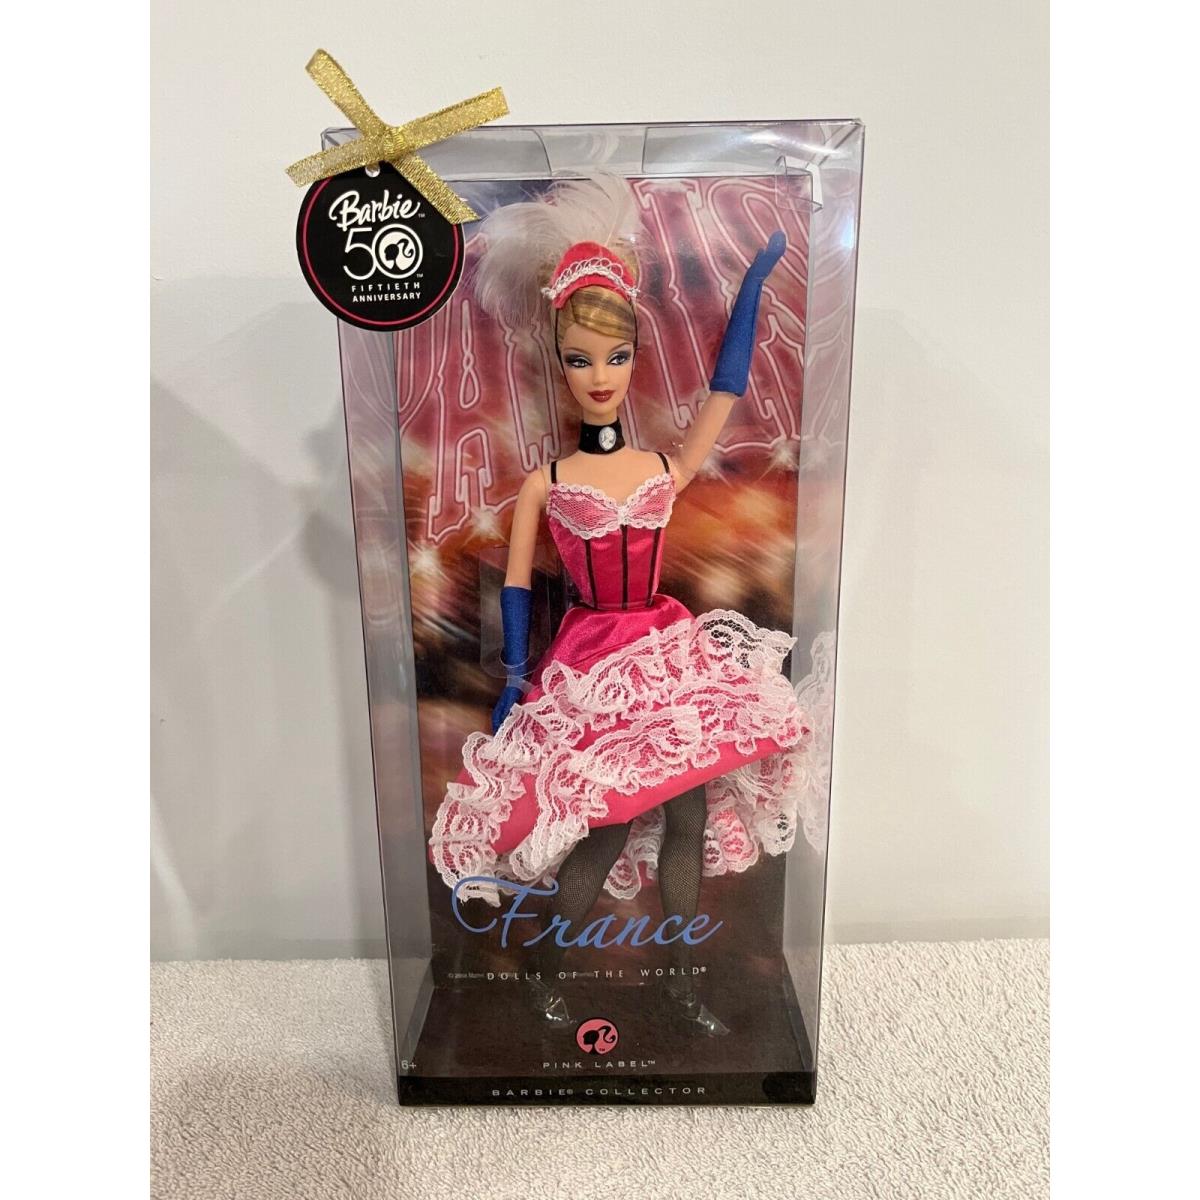 France Barbie - Dolls of The World